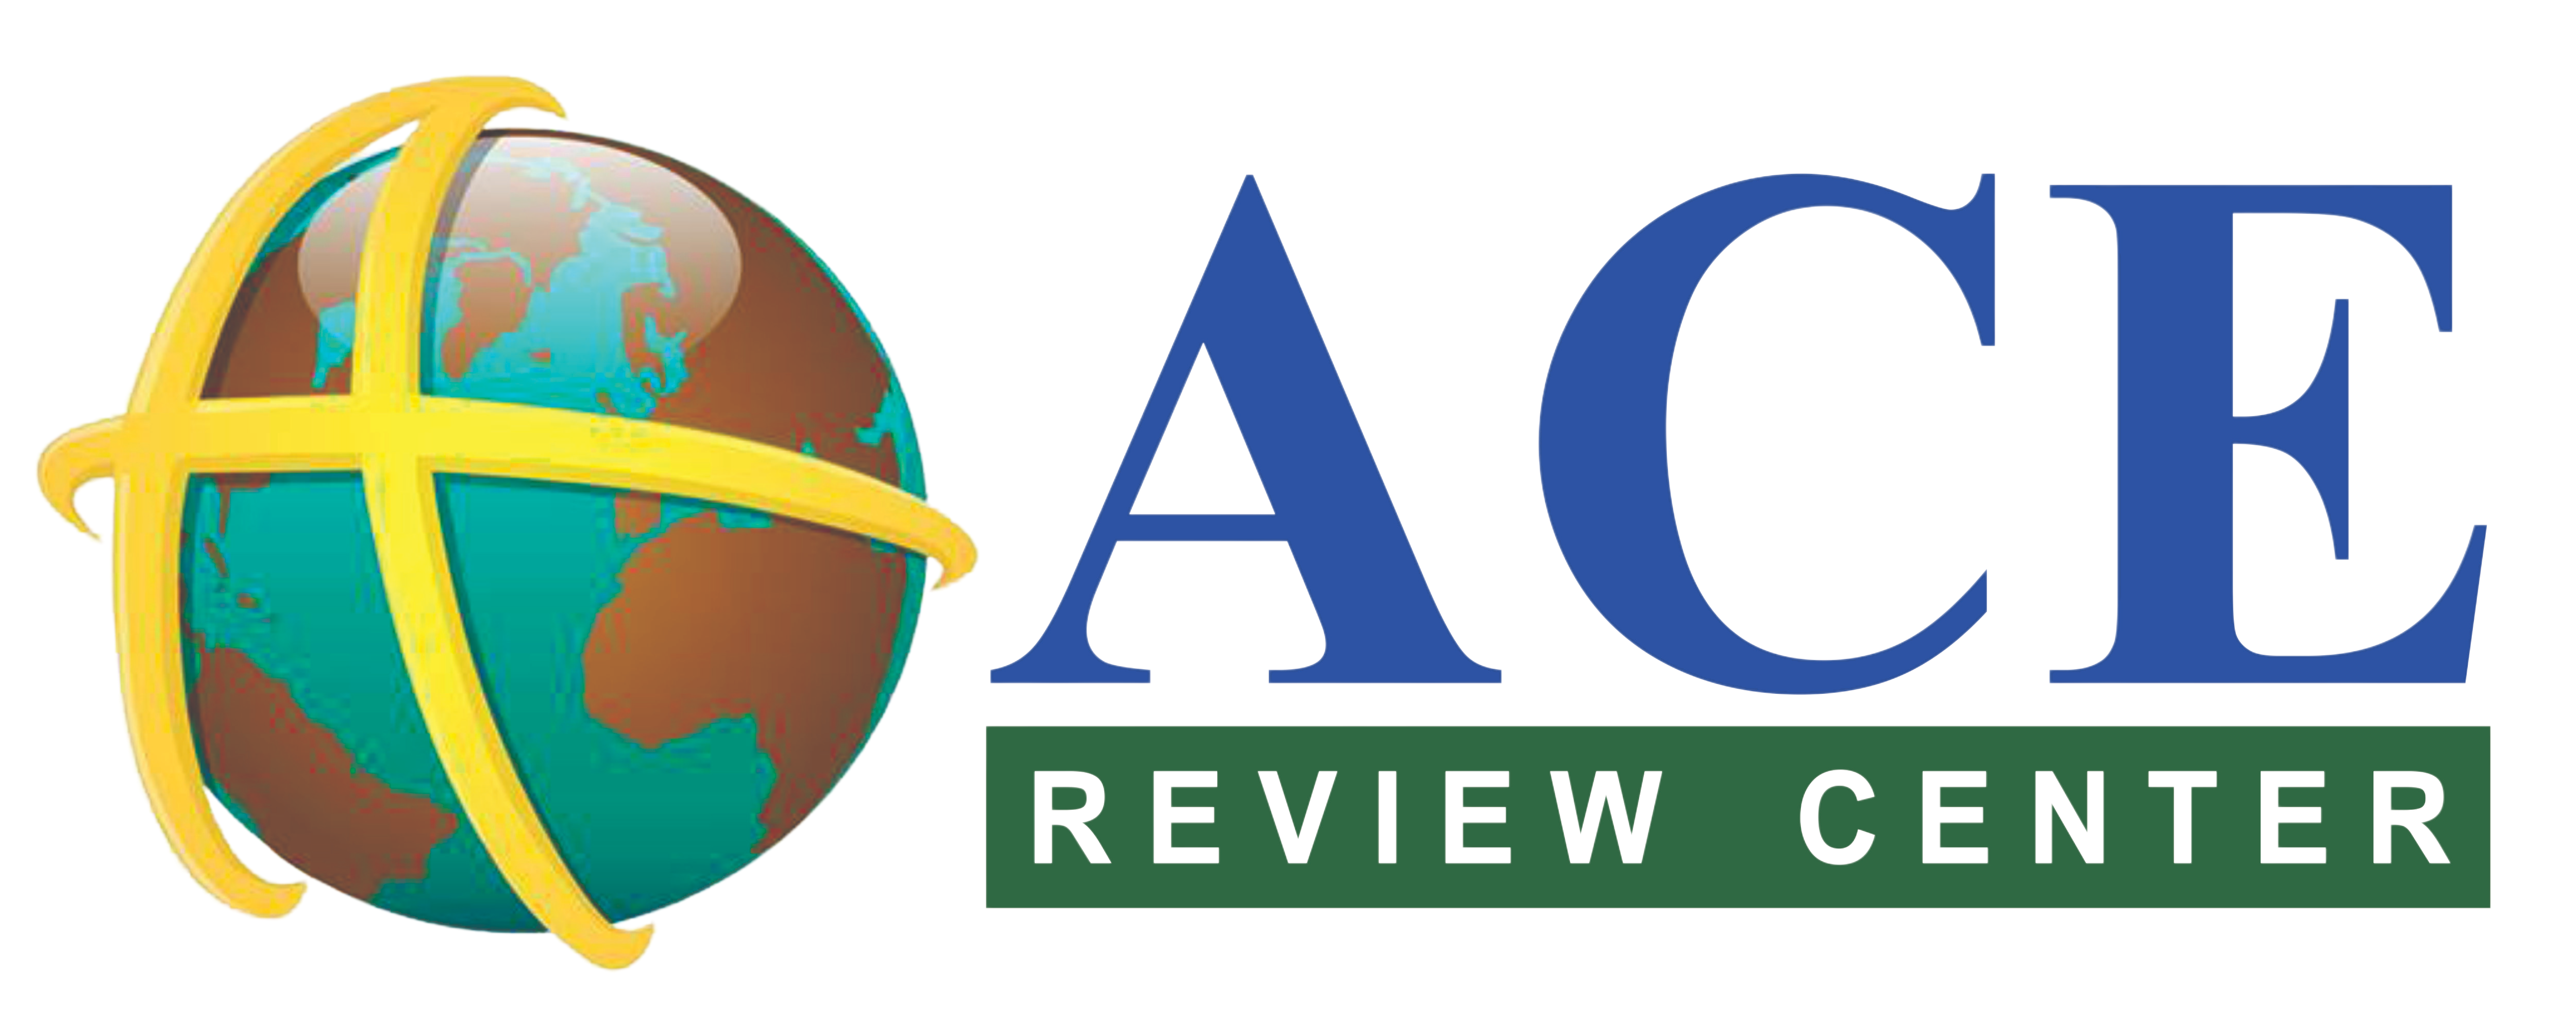 Ace Review Center